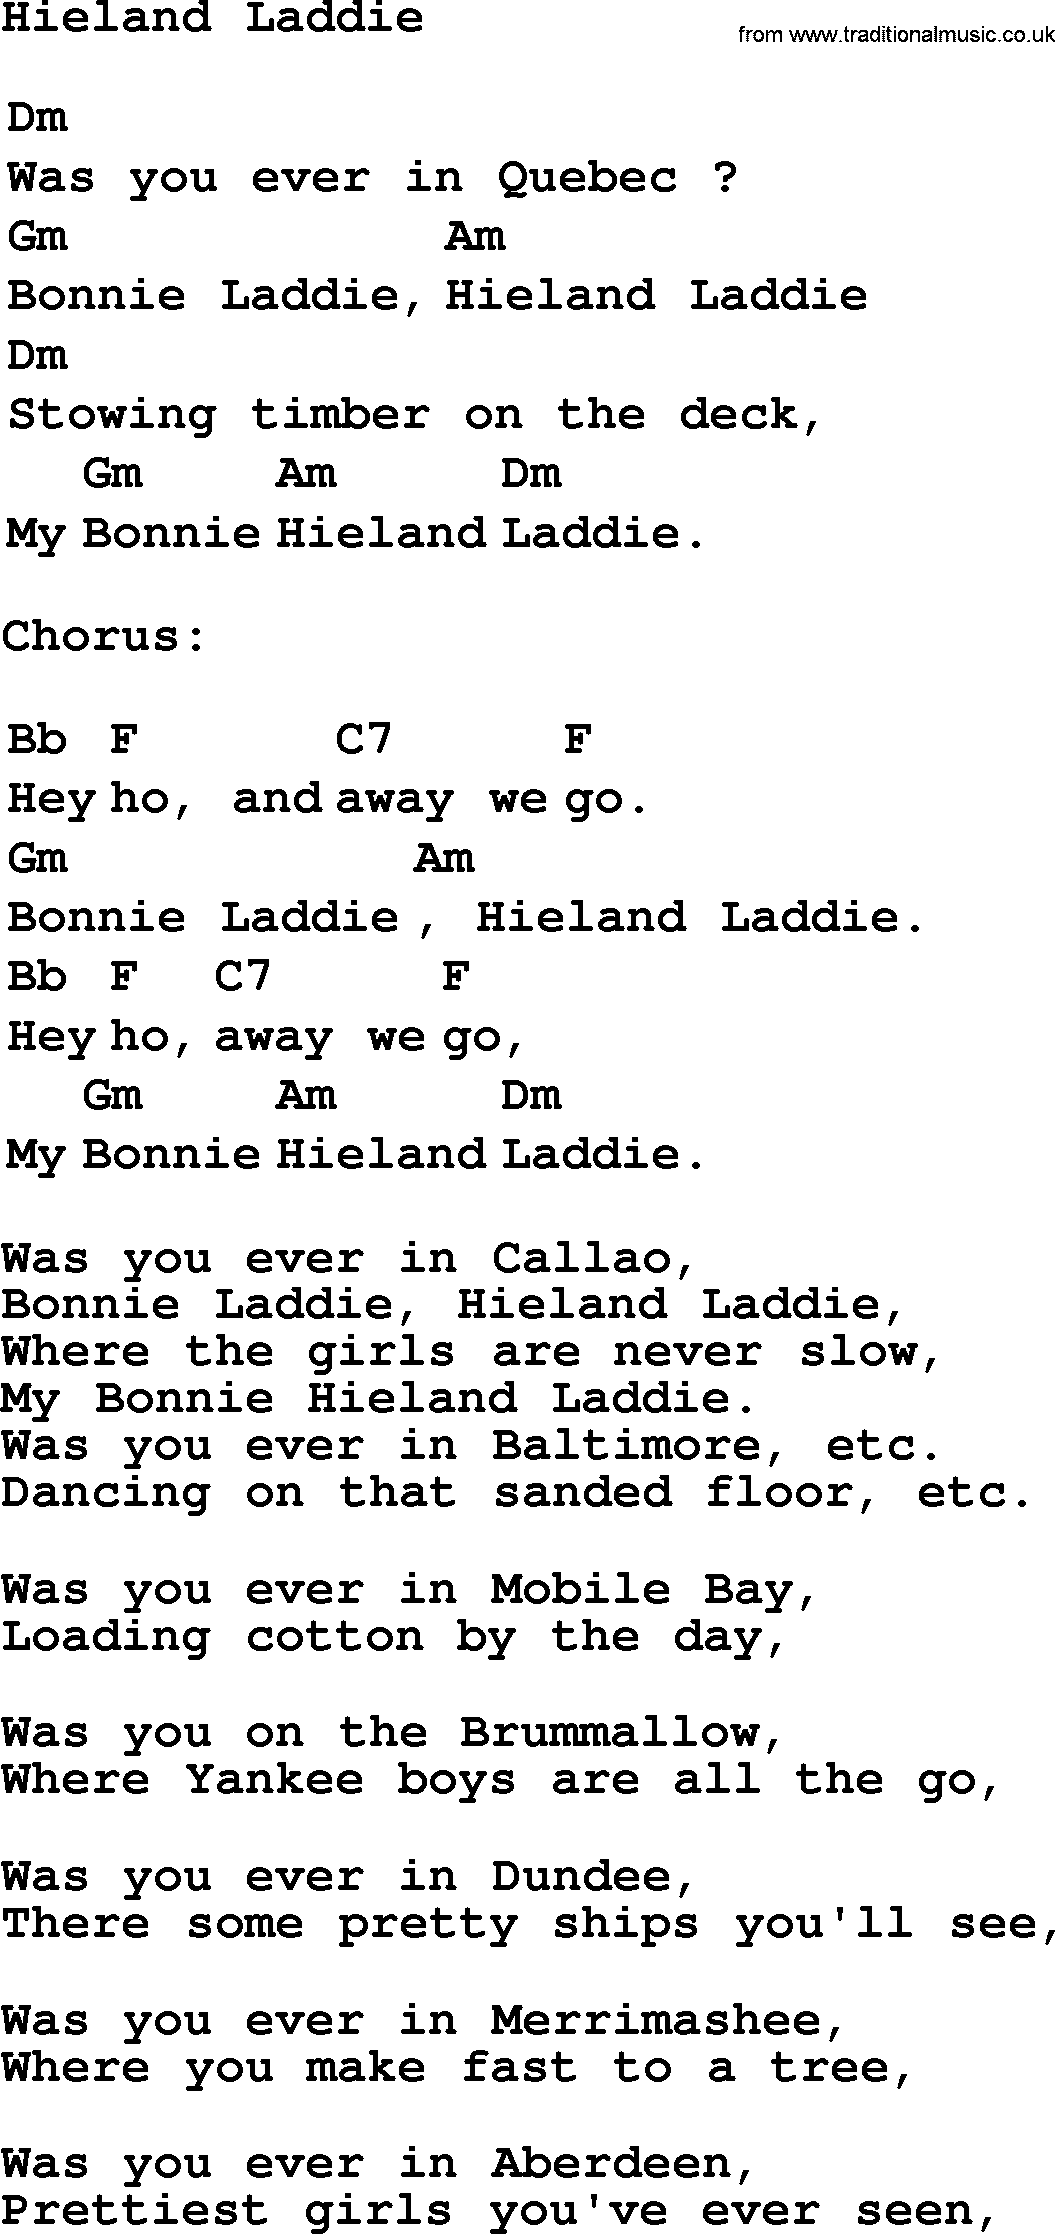 Top 1000 Most Popular Folk and Old-time Songs: Hieland Laddie, lyrics and chords